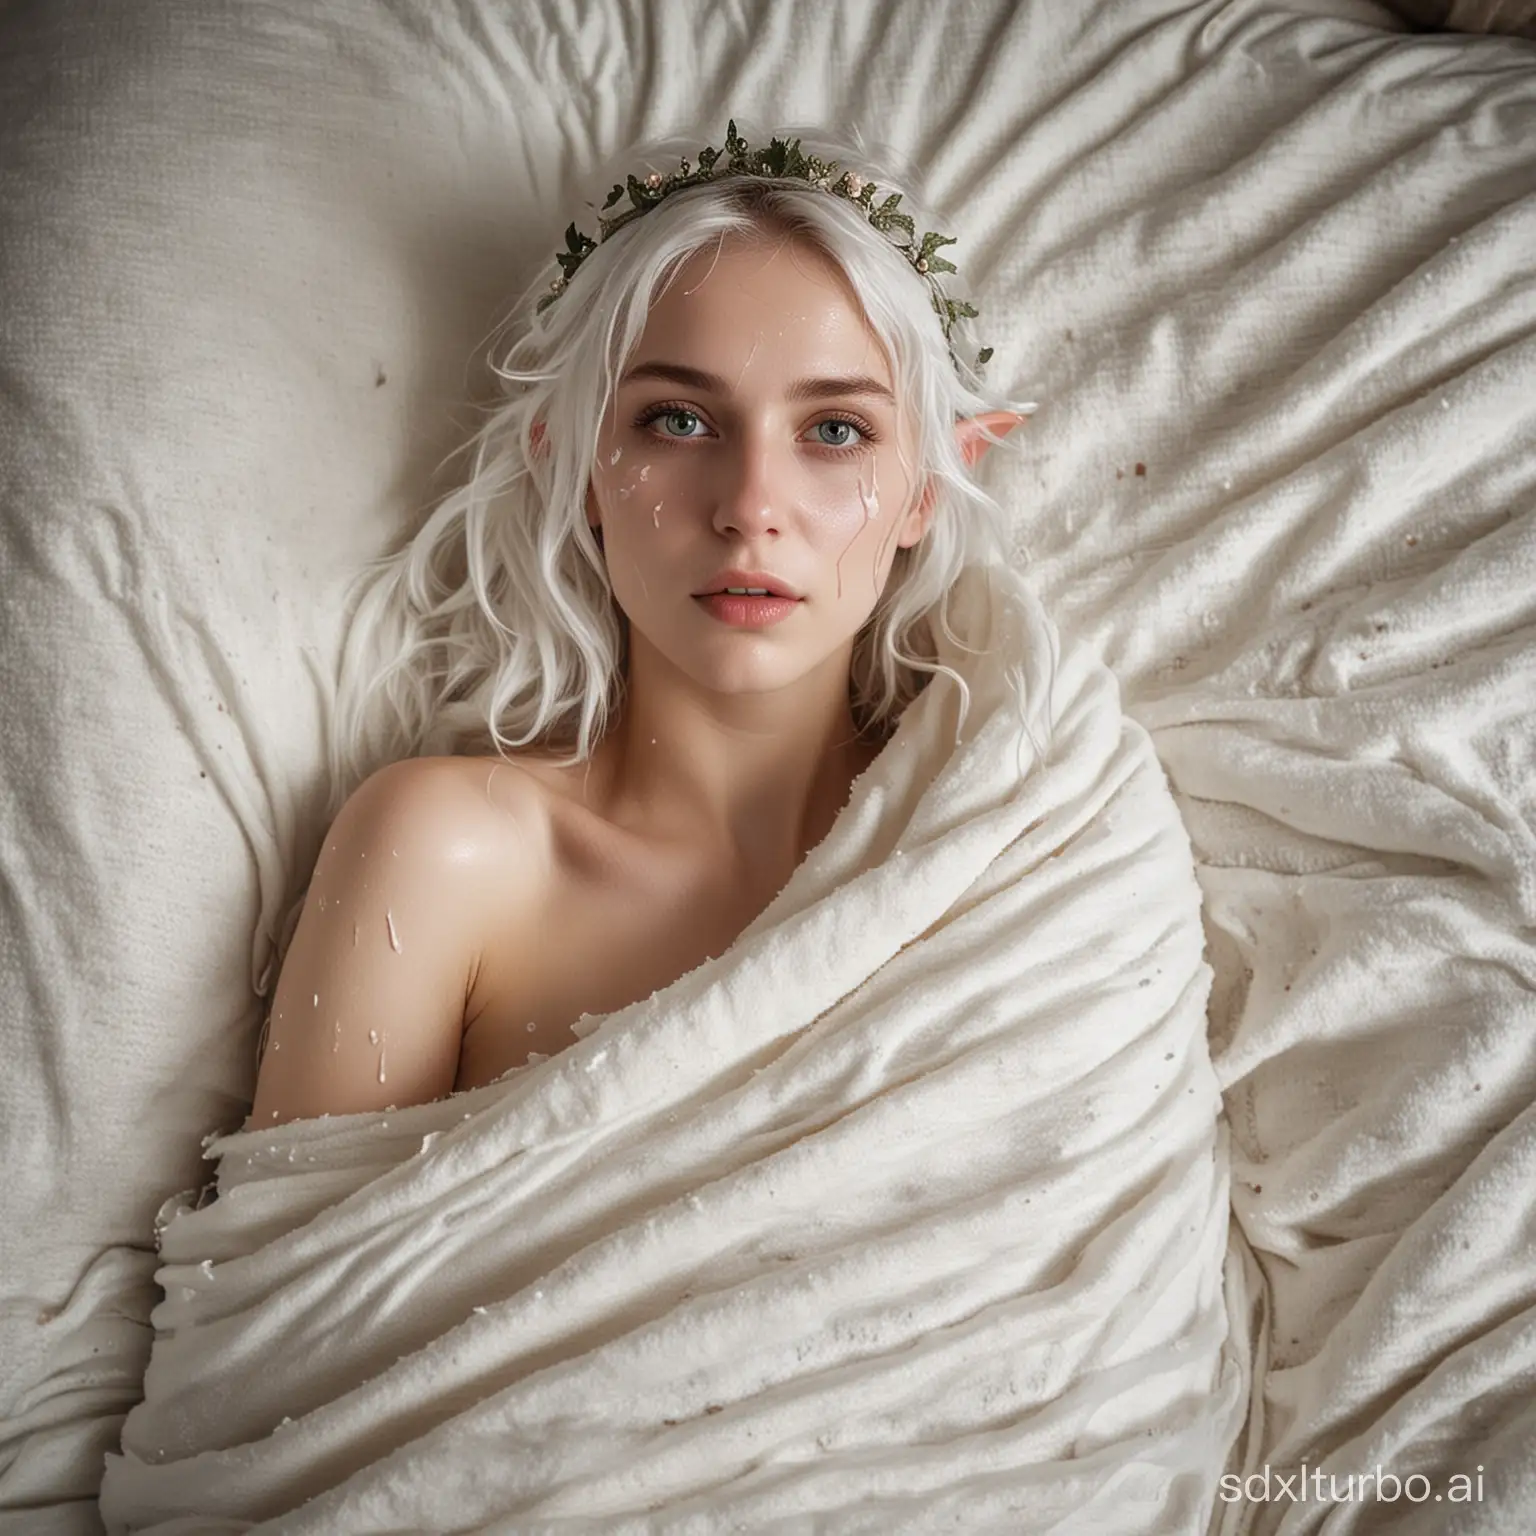 Playful-Elf-Princess-Wrapped-in-a-Cozy-Blanket-with-Yoghurt-Stains